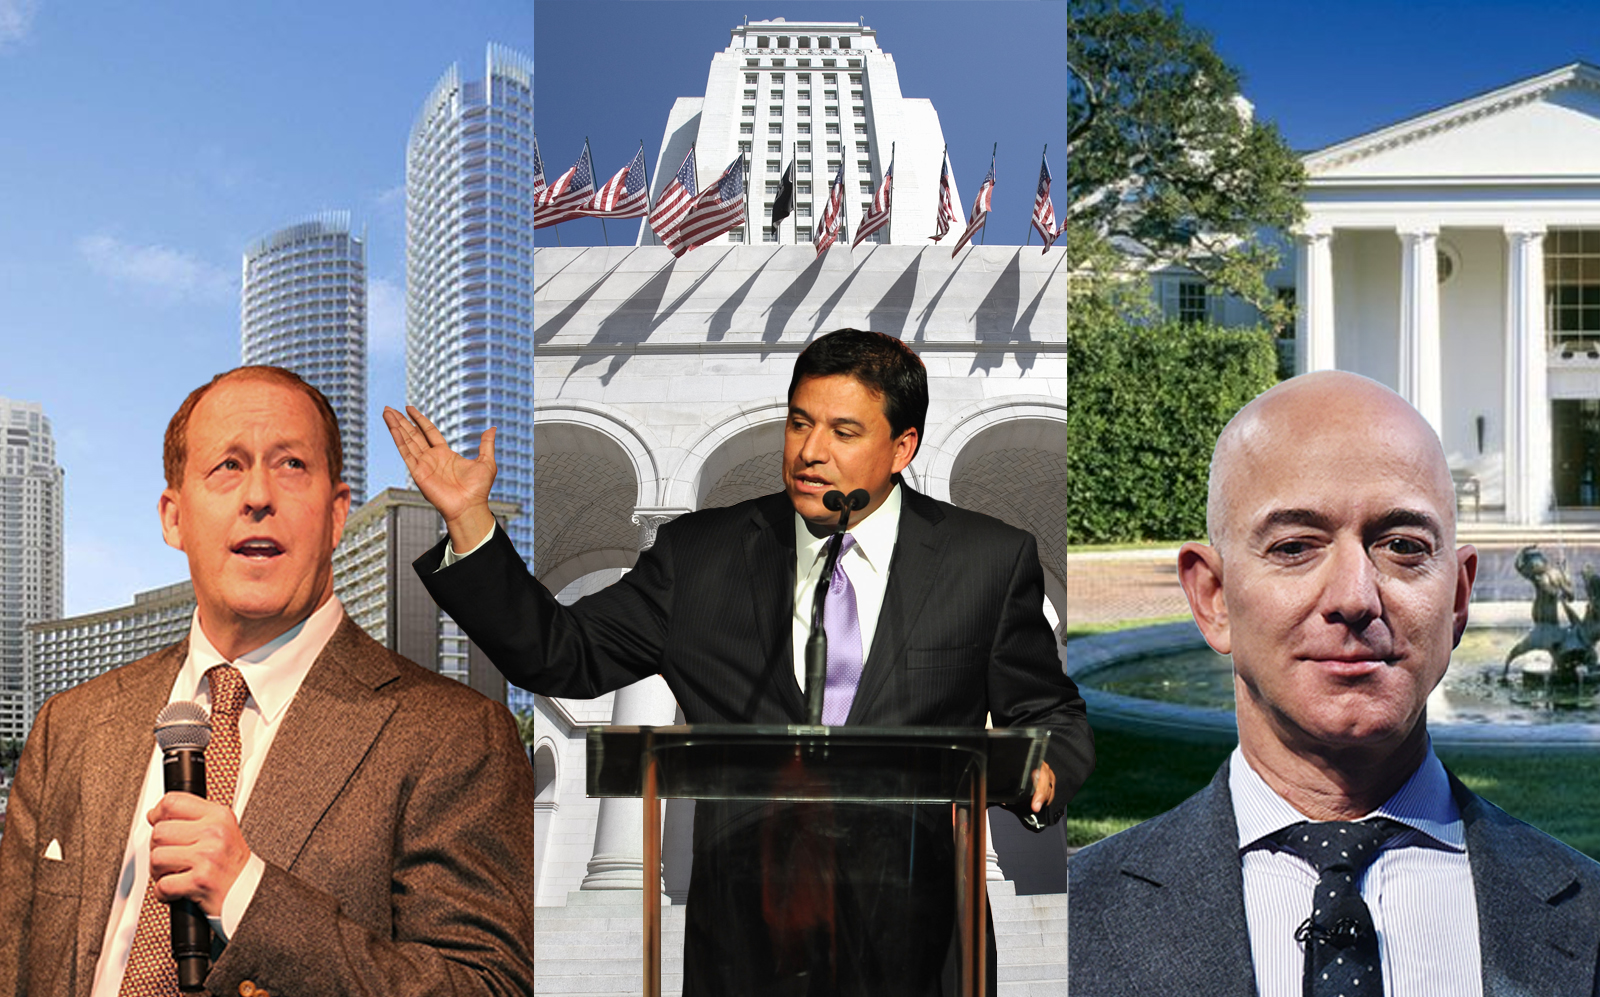 From left, Michael Rosenfeld and Century Plaza, Jose Huizar and City Hall, Jeff Bezos and 1801 Angelo Drive (Getty Images)